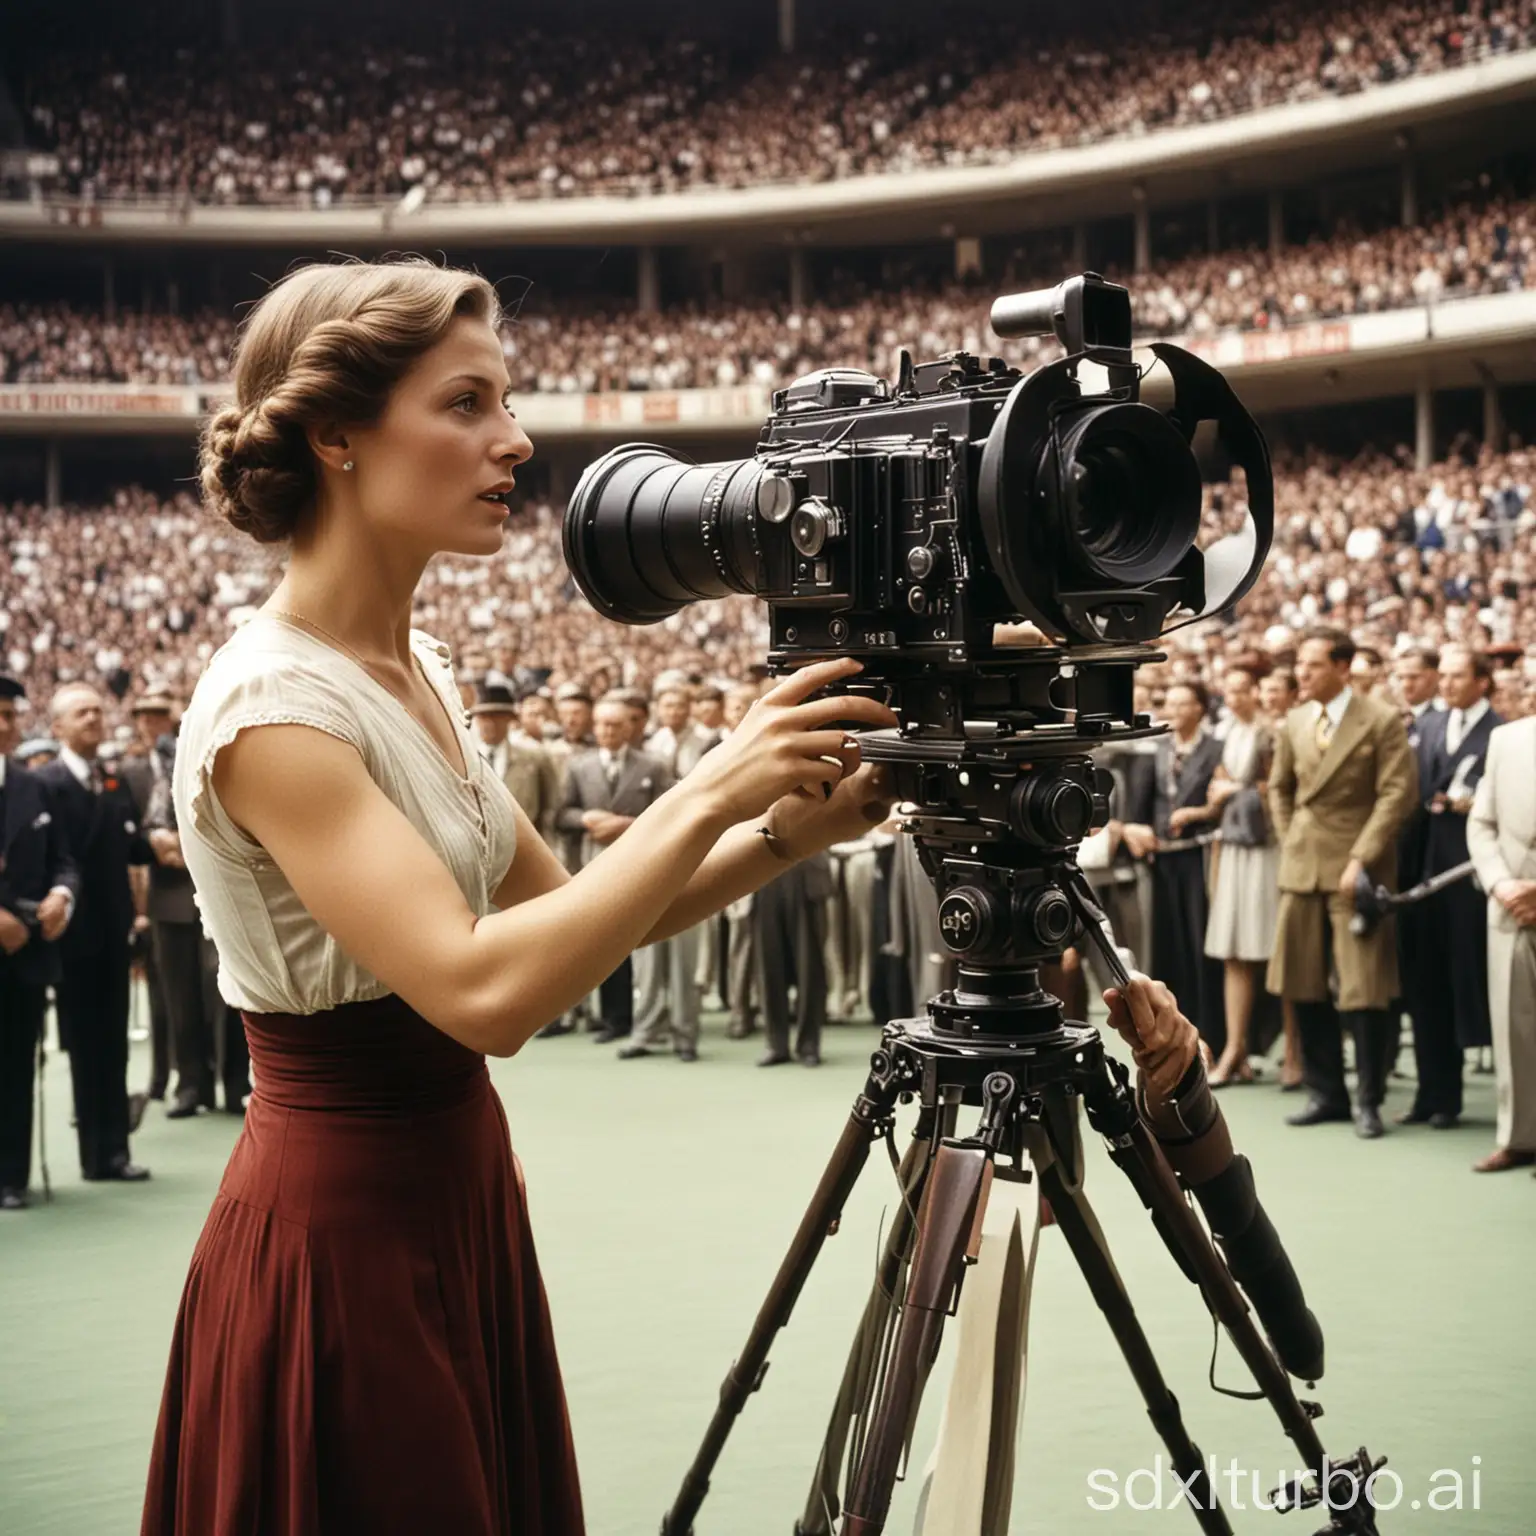 old color photo of Leni Riefensthal filming at Olympia 1936 in Berlin